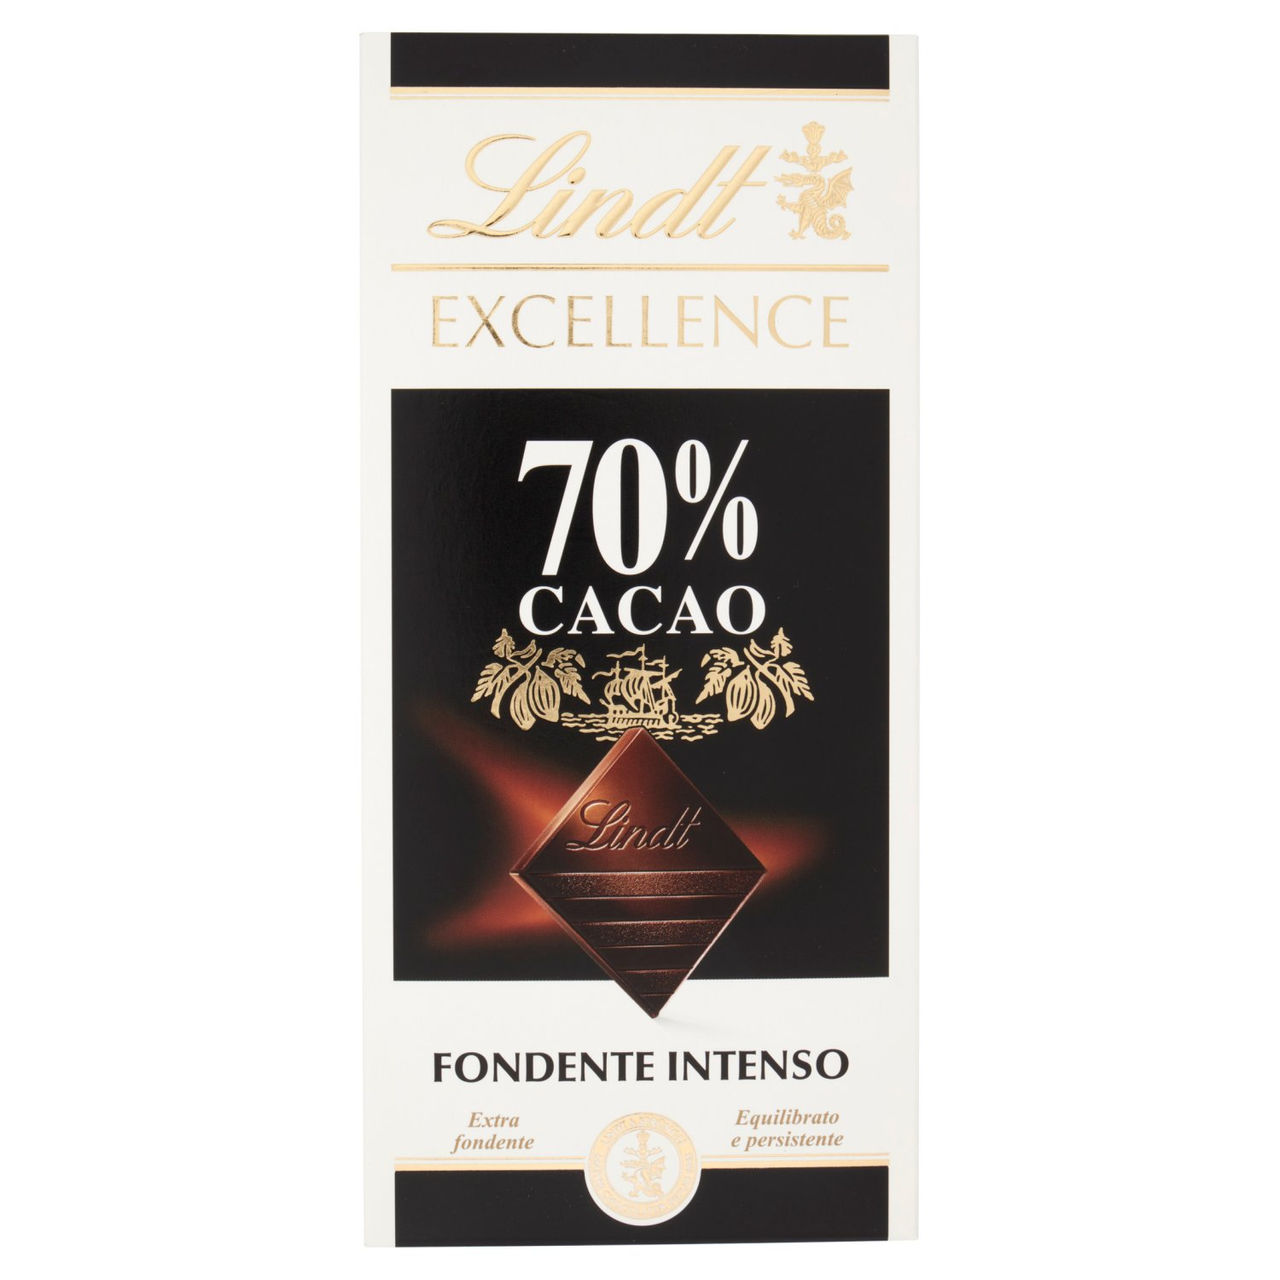 Lindt Excellence 70% Cacao Fondente Intenso 100 g